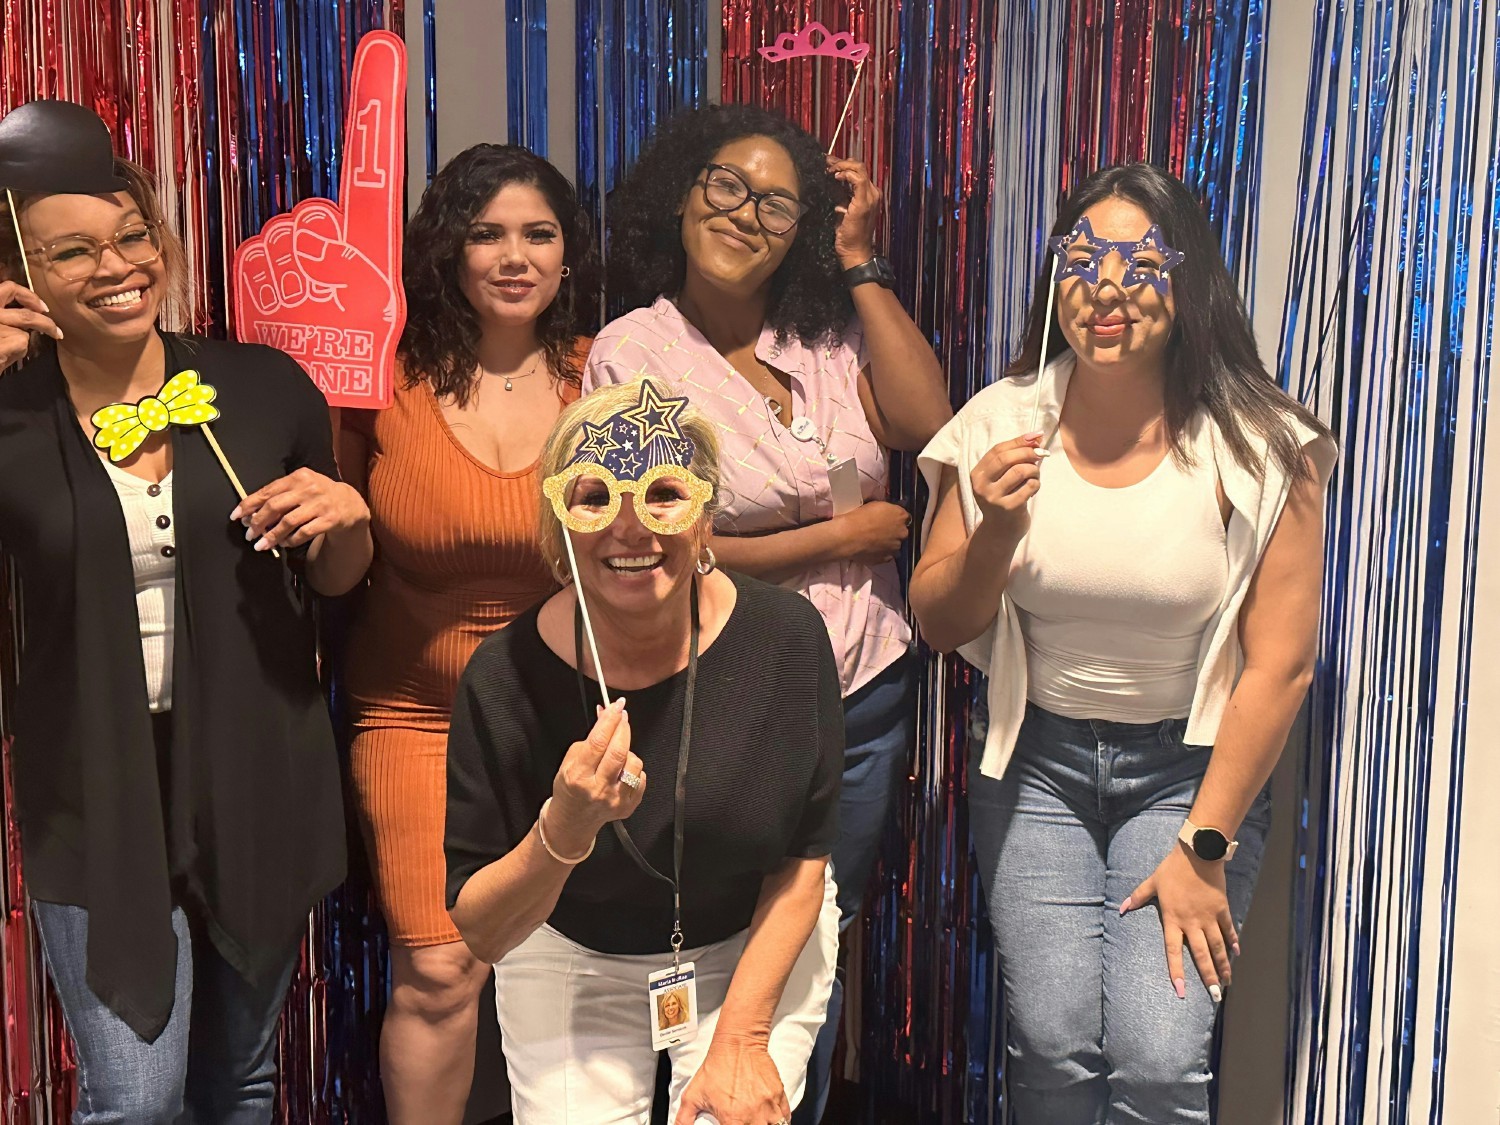 Flagship associates strike a pose at a photo booth during Associate Appreciation Day.